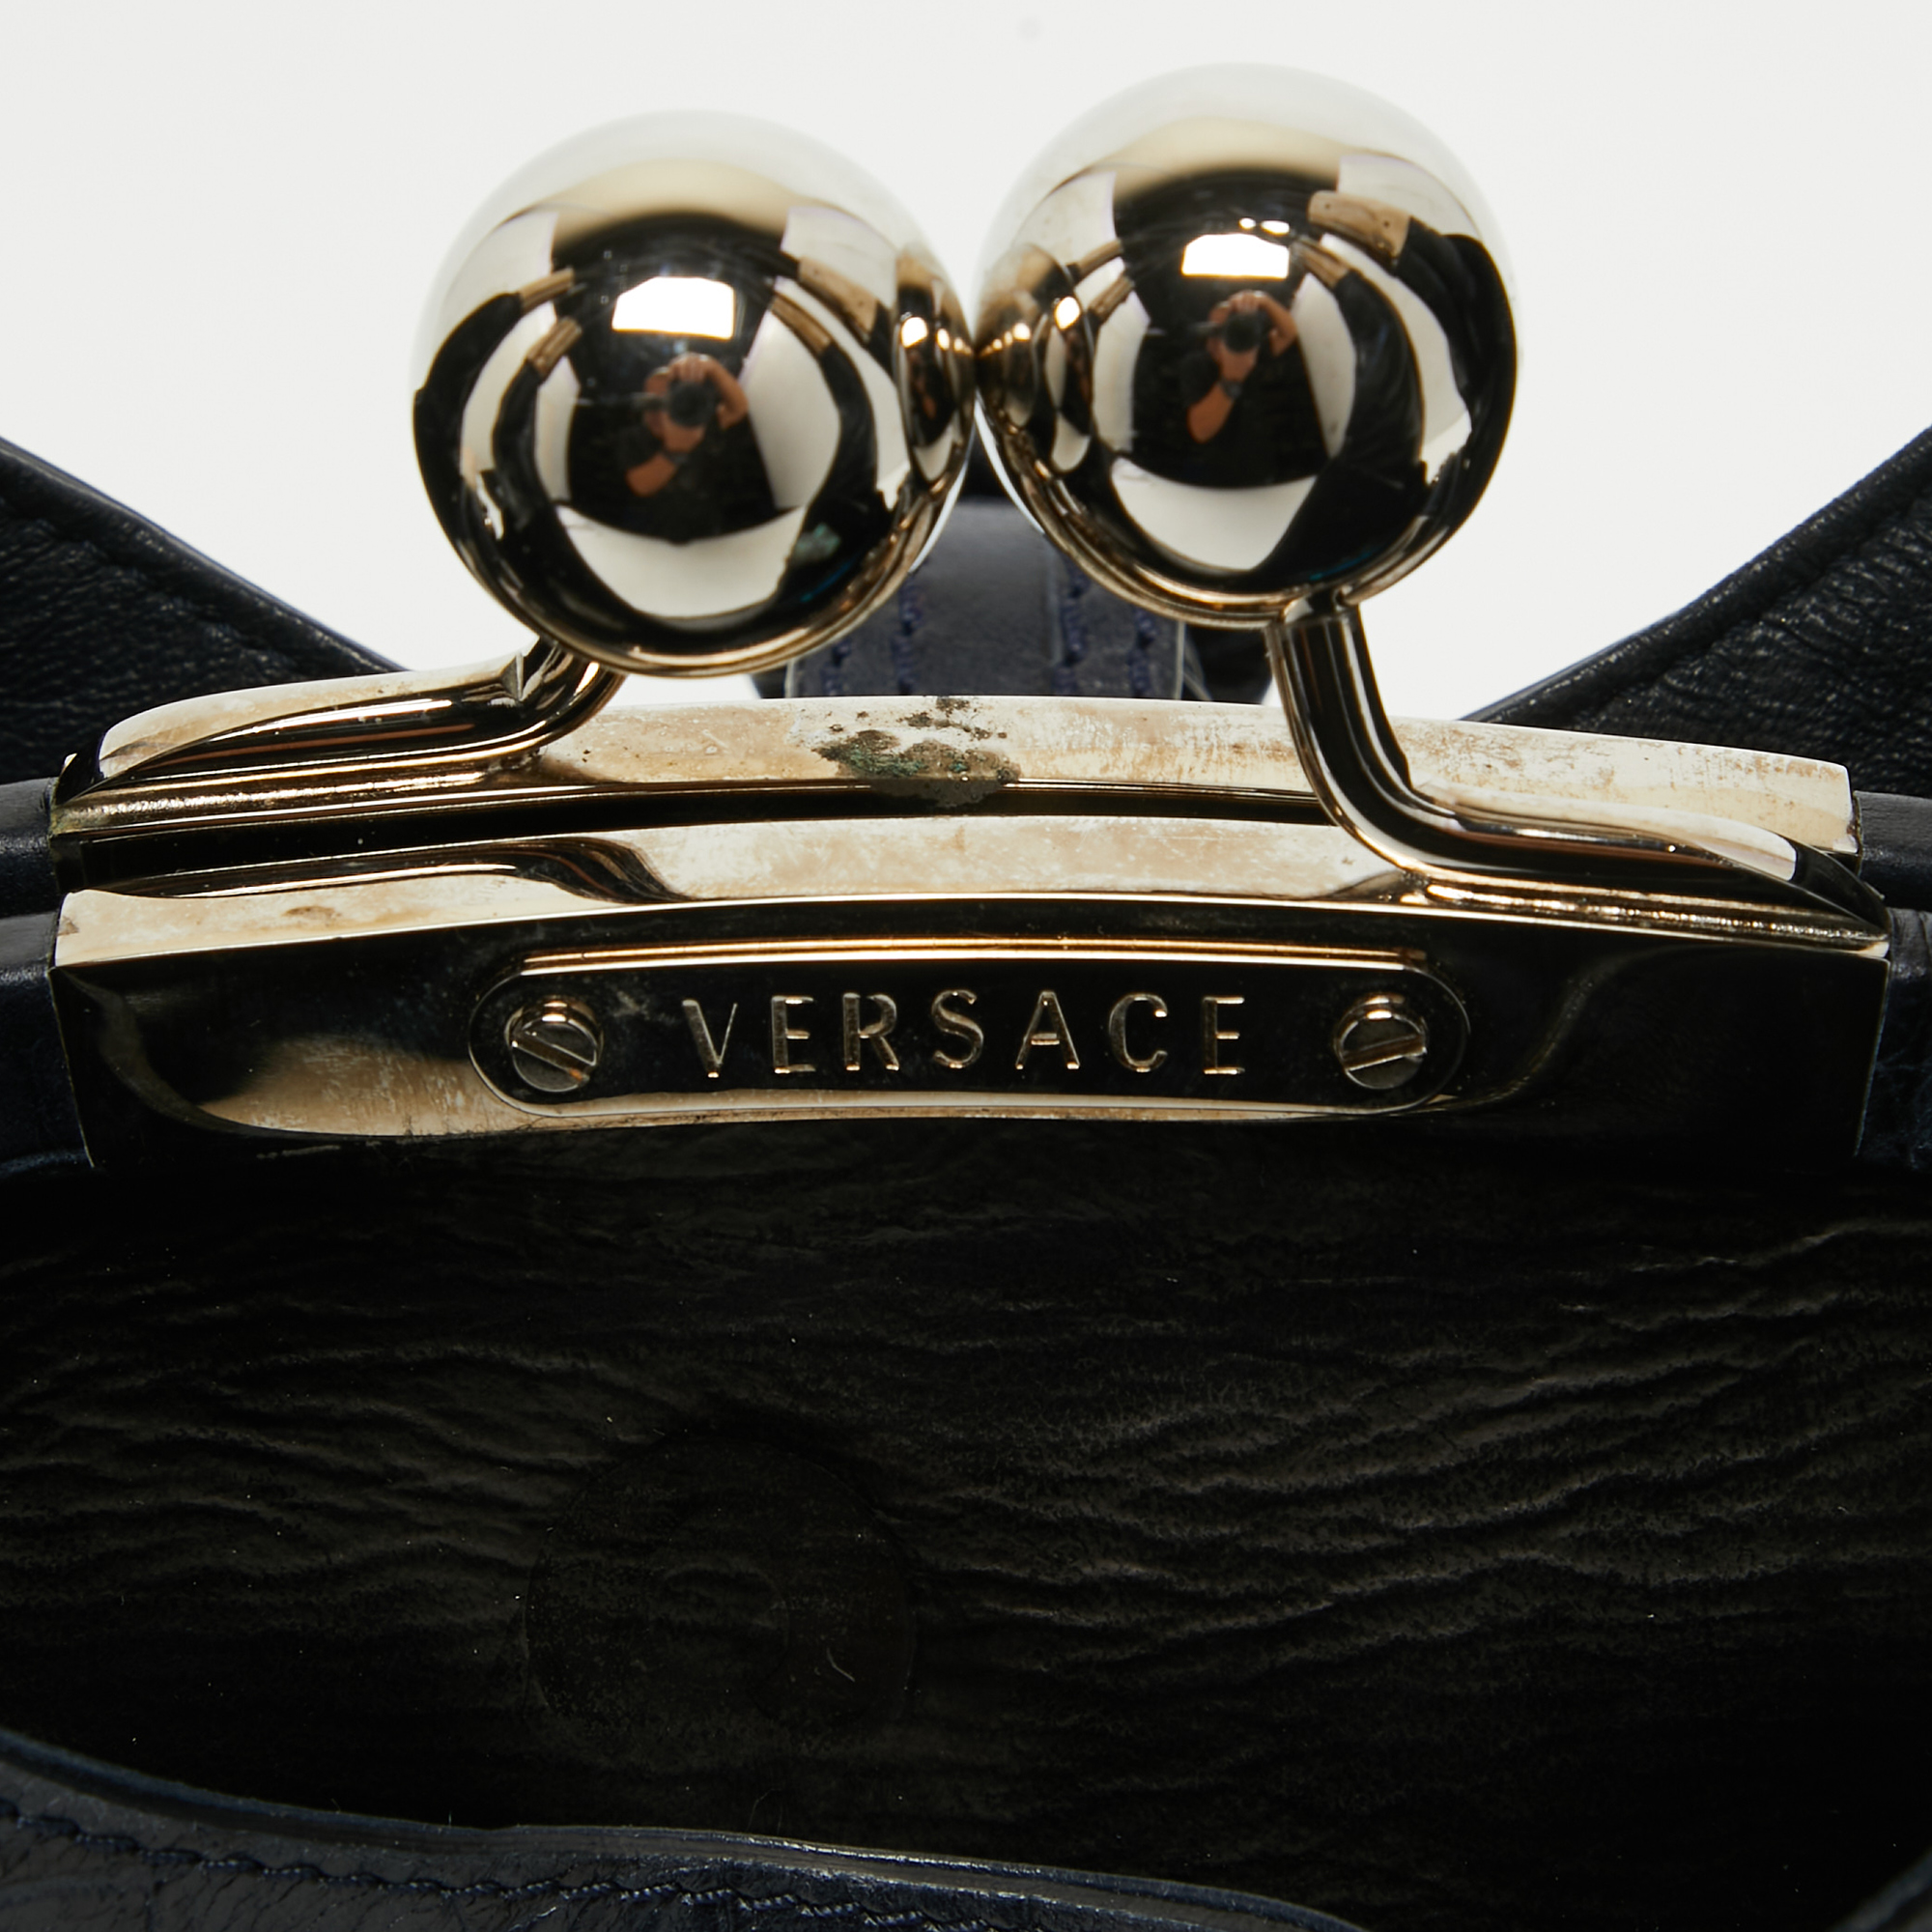 Versace Black/Navy Blue Croc Embossed Leather And Glossy Leather Kiss Lock Satchel